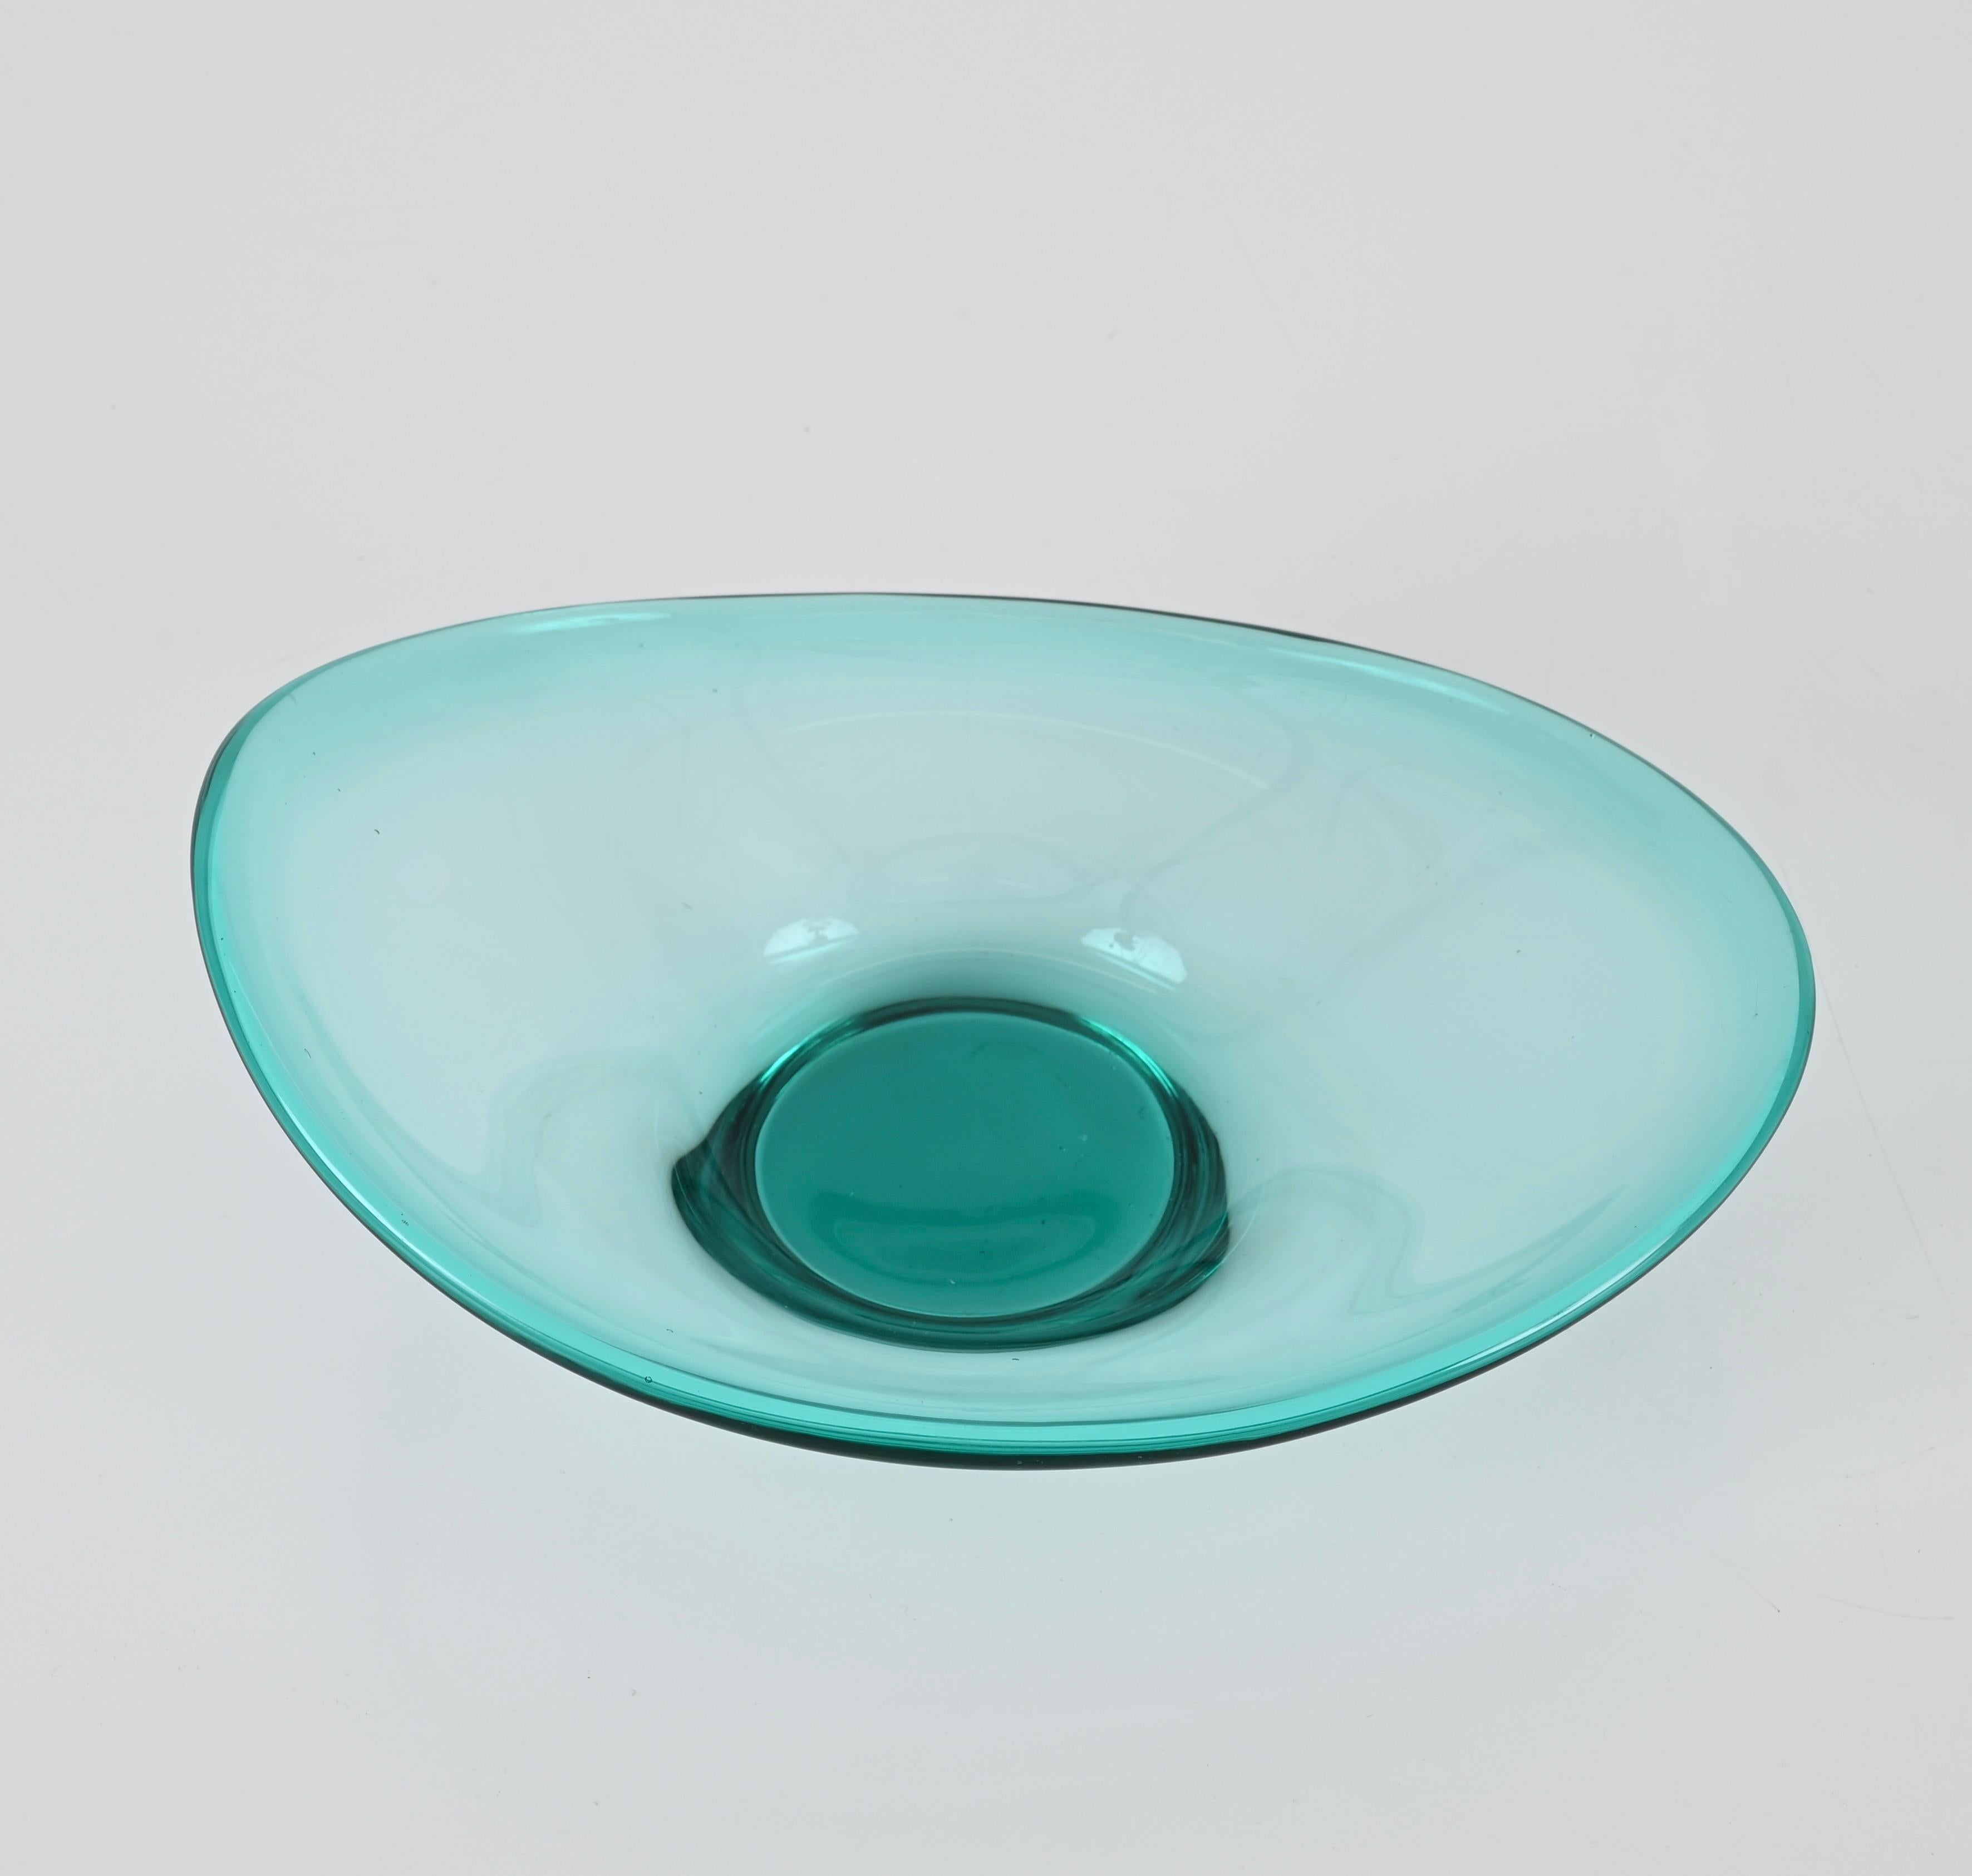 Hand-Crafted Tiffany Blue Murano Glass Bowl or Pocket Emptier, Italy, 1960s For Sale